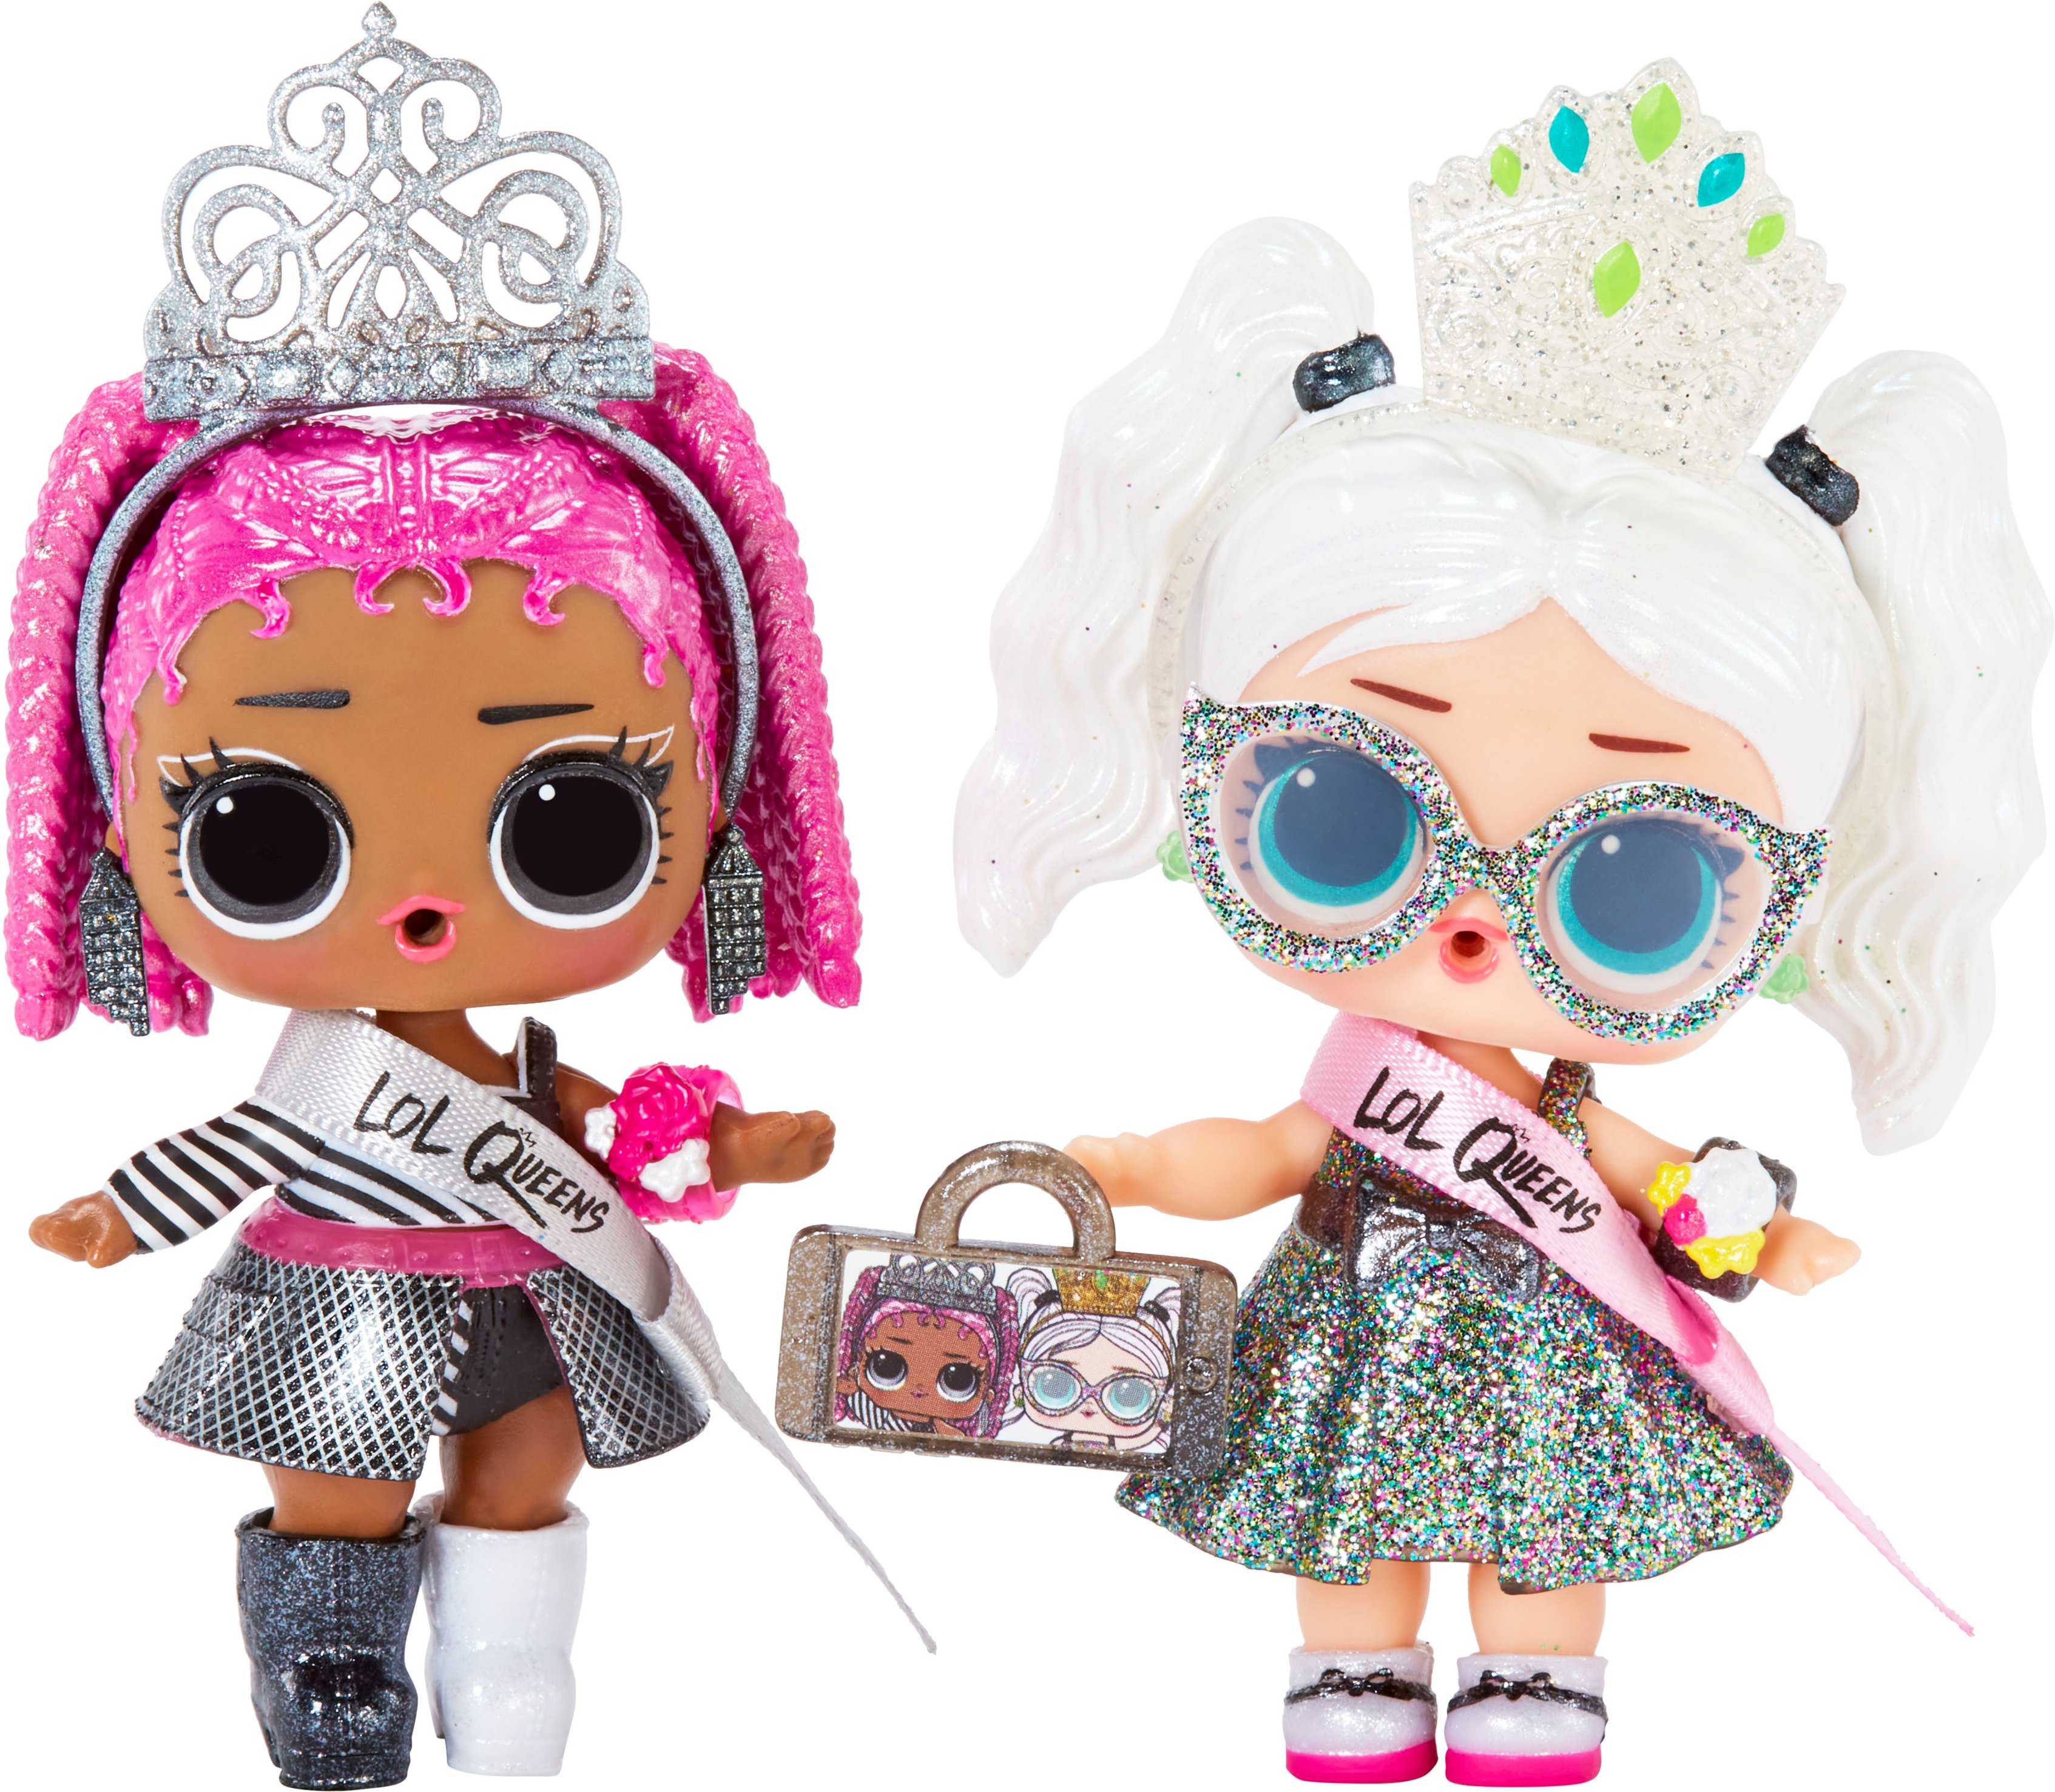 Angle View: LOL Surprise Queens Dolls with 9 Surprises Including Doll, Fashions, and Royal Themed Accessories - Great Gift for Girls Age 4+